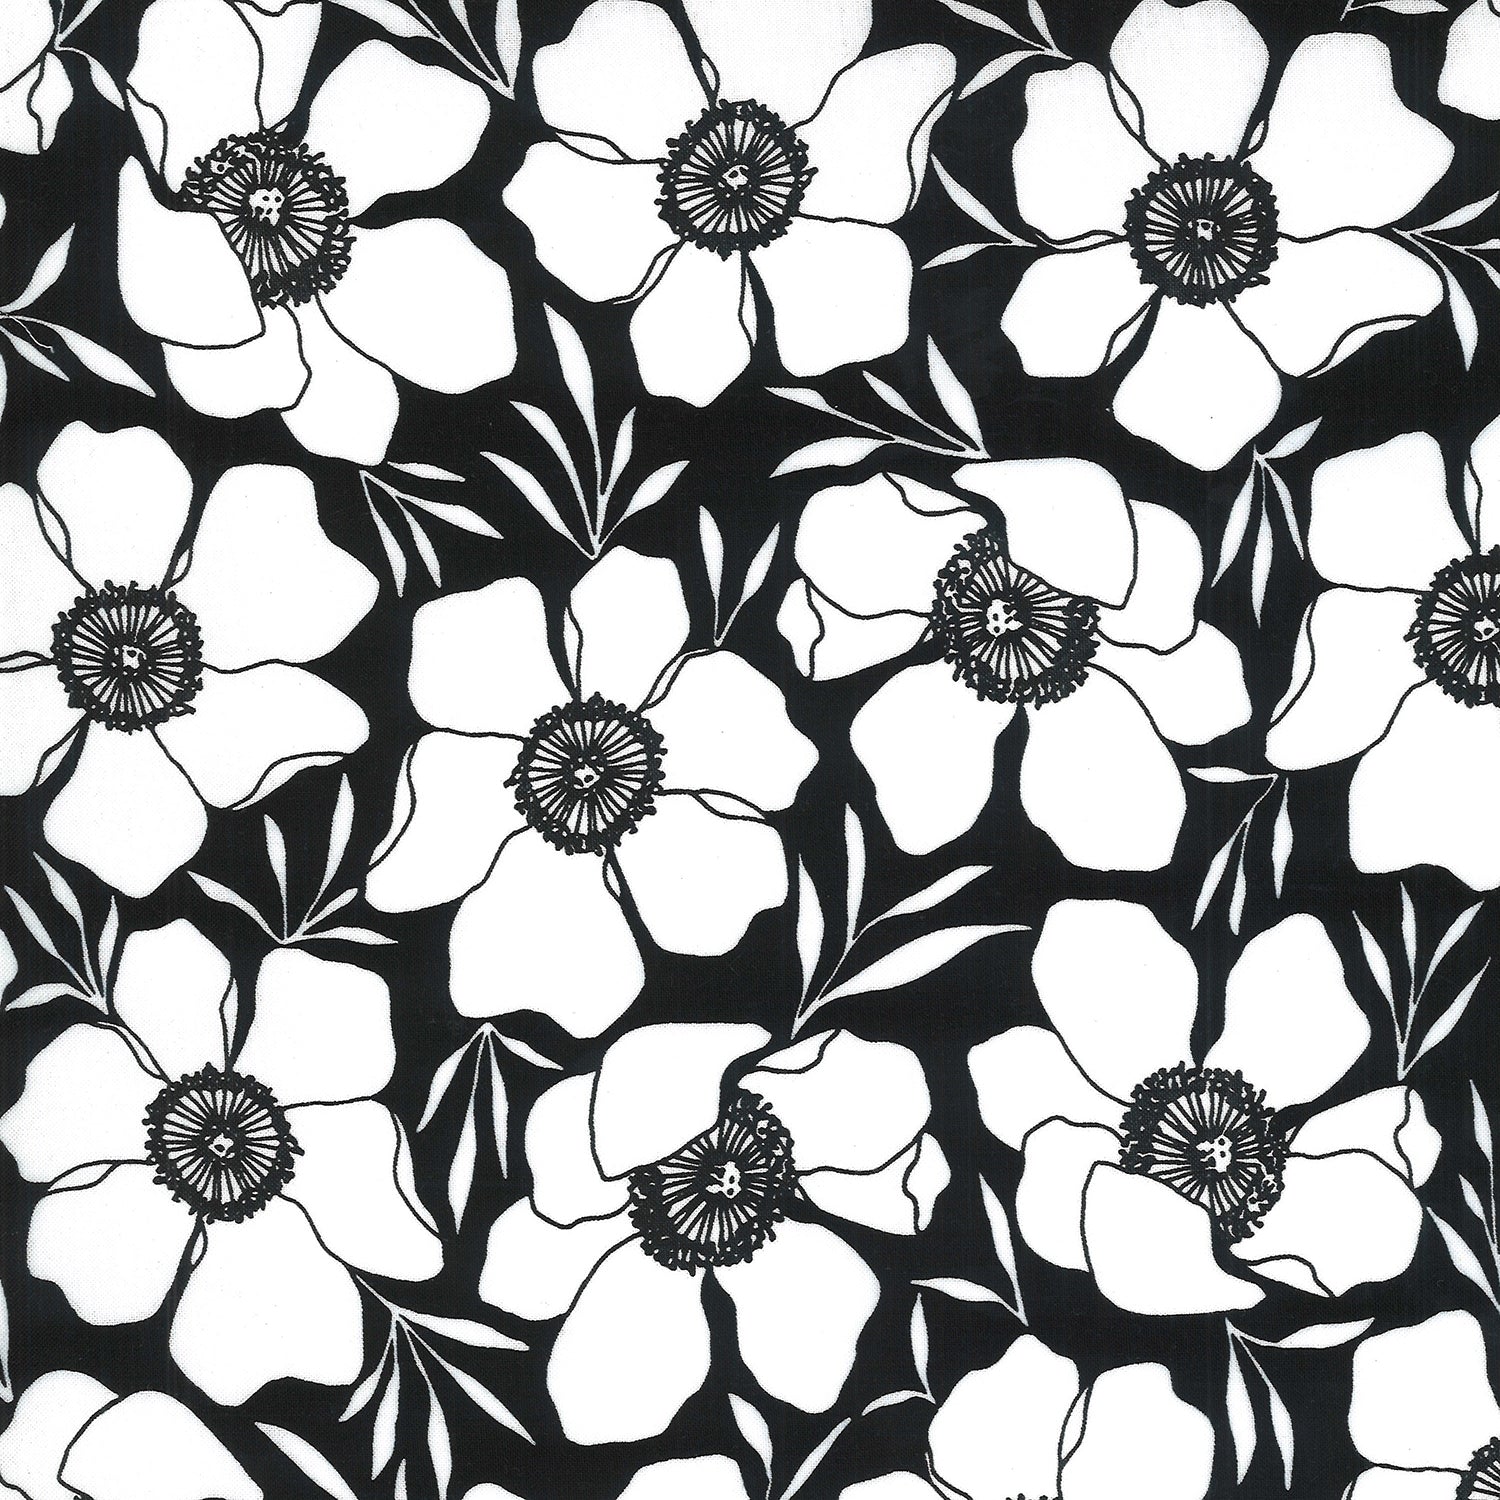 Anemone Flowers on Ink - Weave & Woven